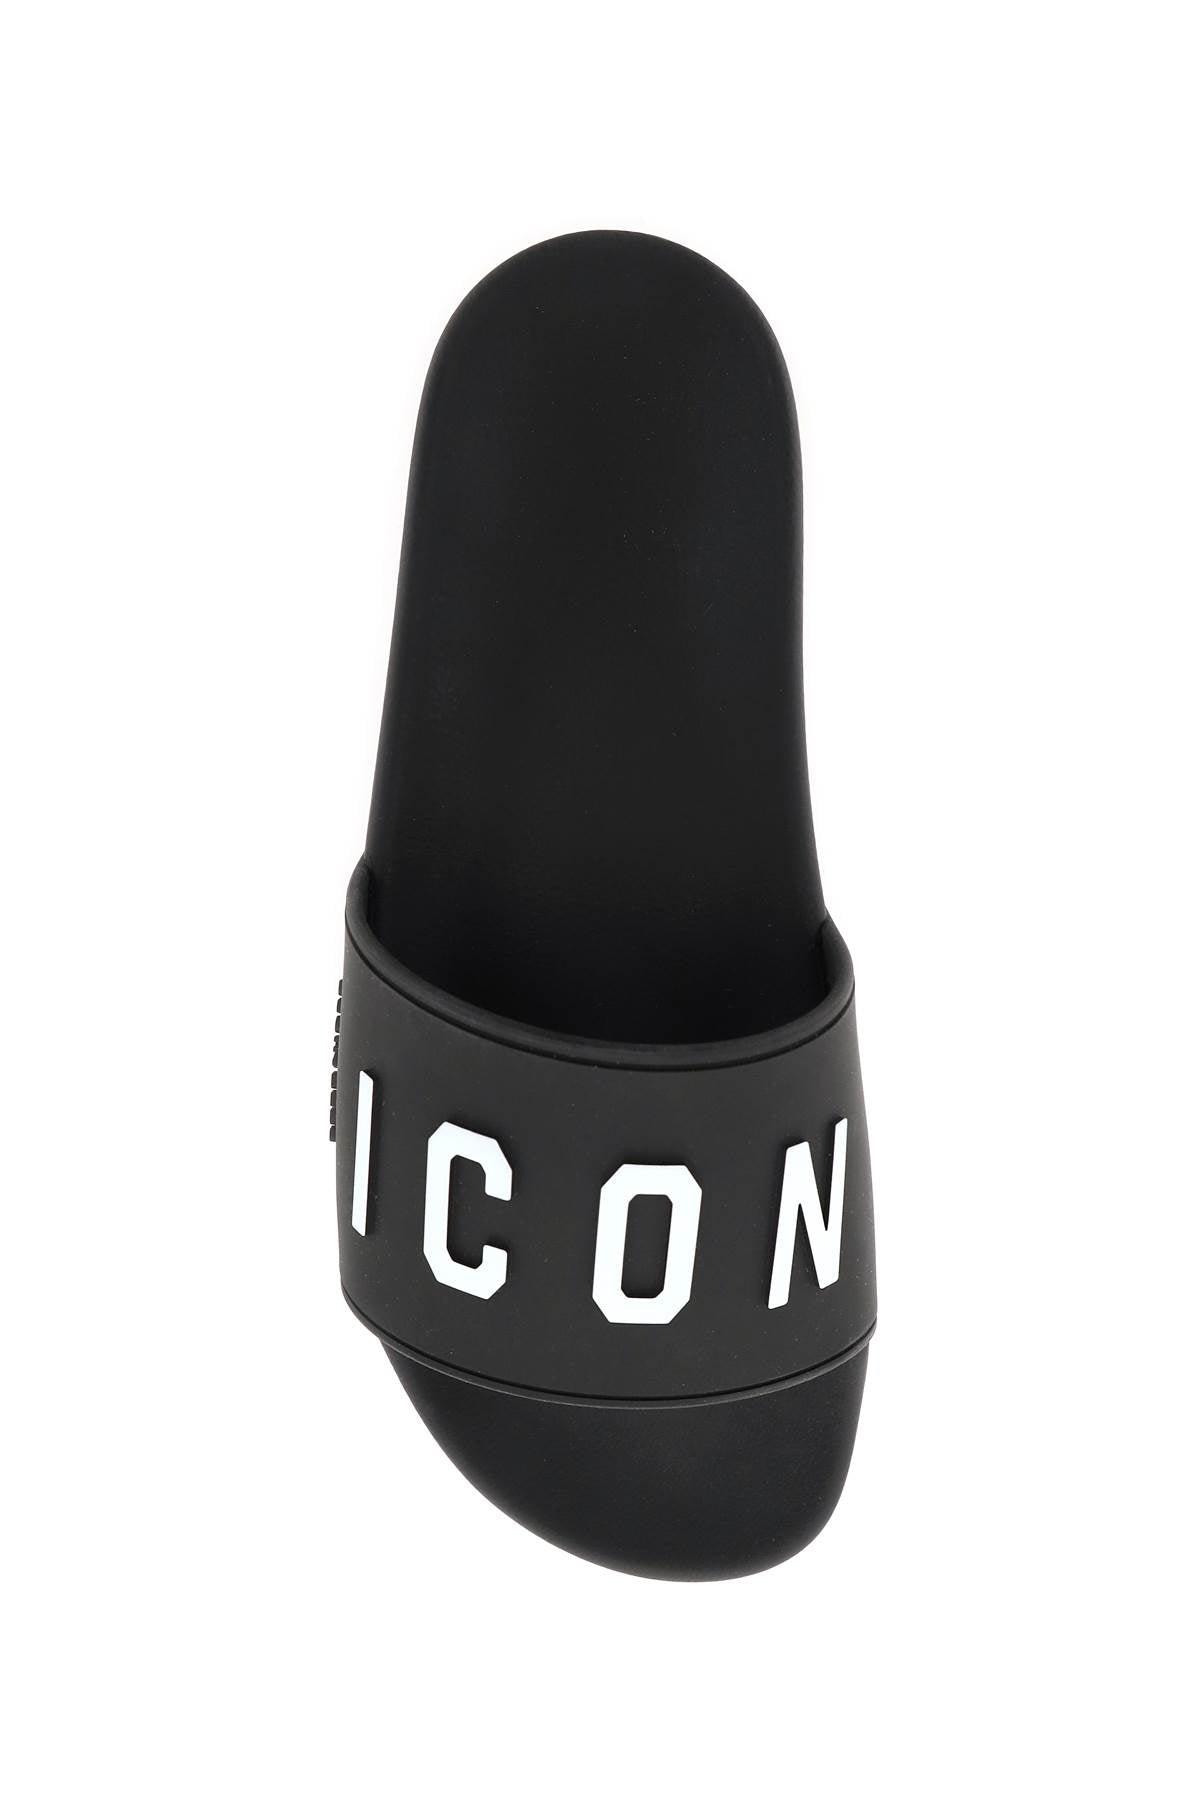 DSquared² 'icon' Rubber Slides in Black | Lyst